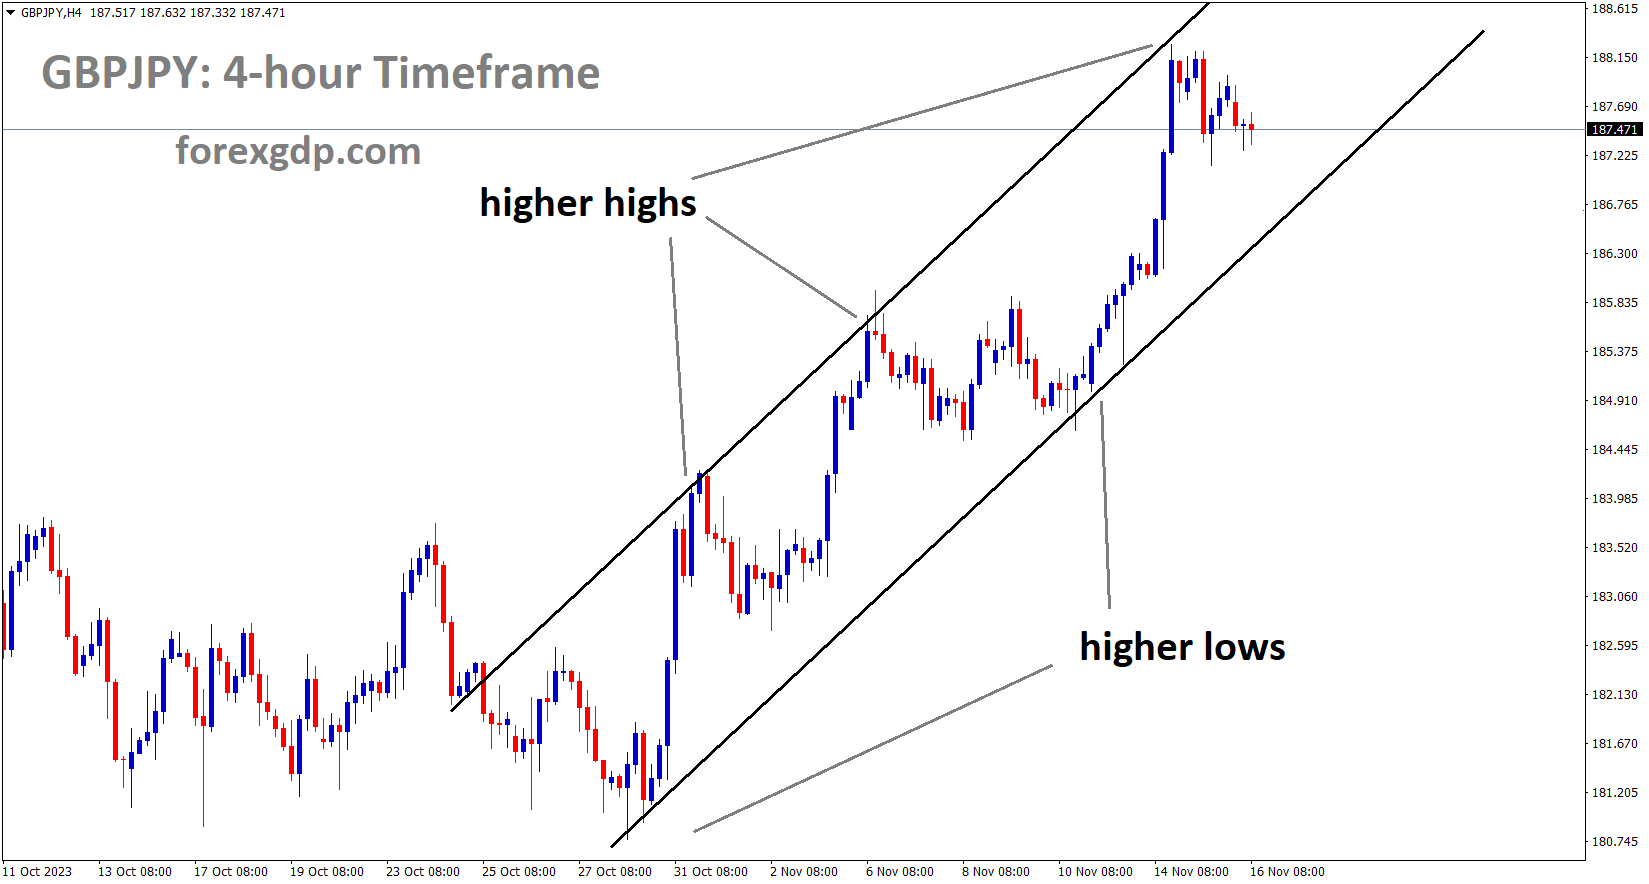 GBPJPY is moving in an Ascending channel and the market has fallen from the higher high area of the channel